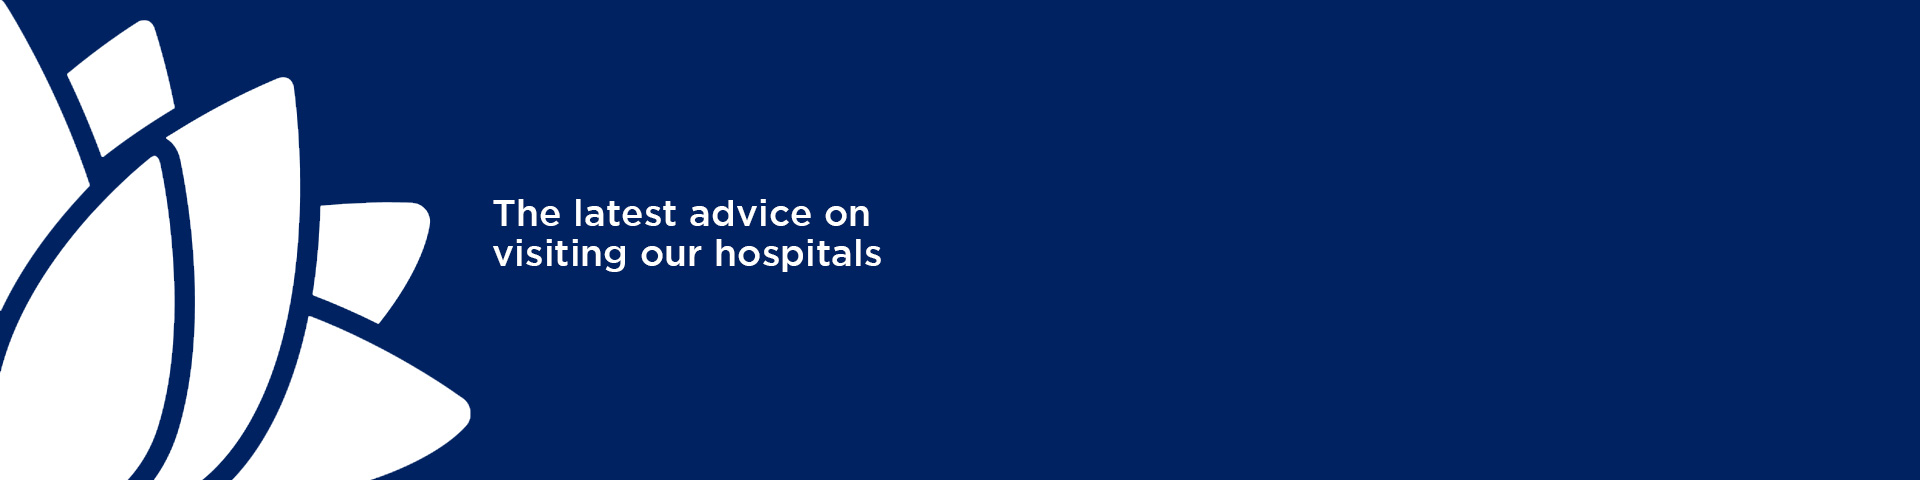 The latest advice on visiting our hospitals